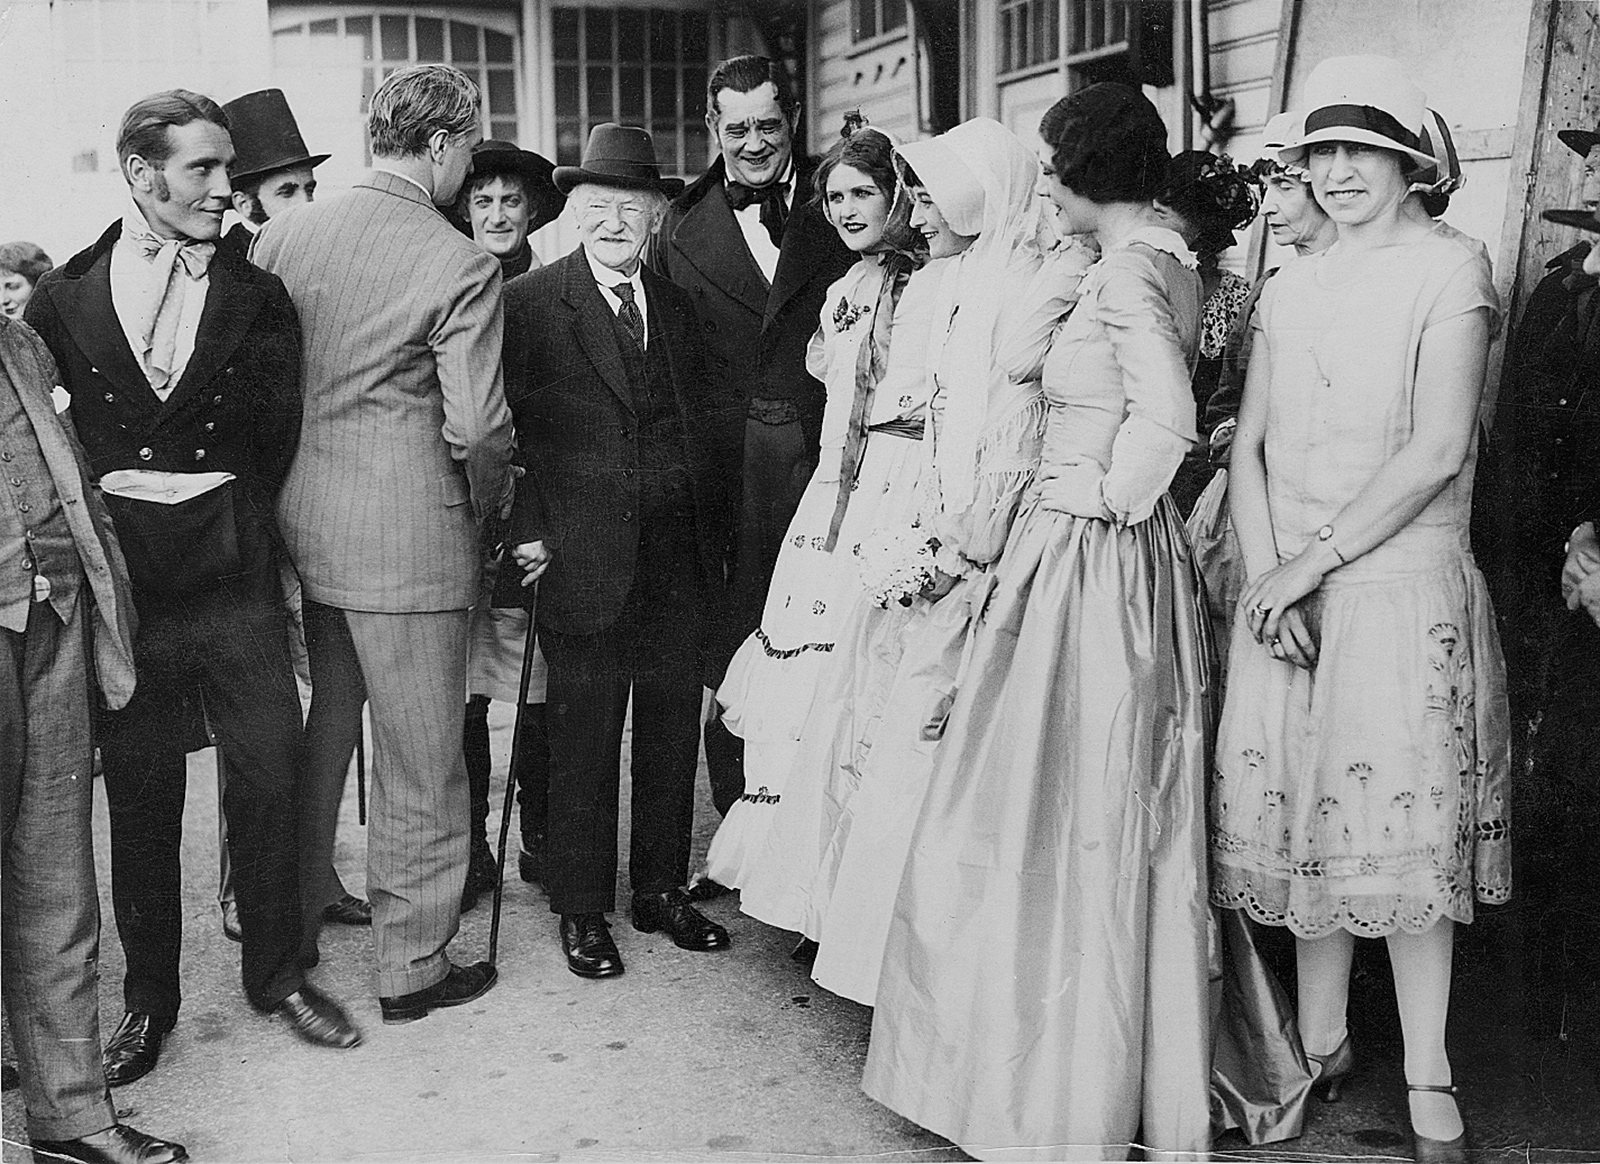 Thomas Hardy with members of the Barnes Theatre Company’s production of The Mayor of Casterbridge, Weymouth, Dorset, 1926